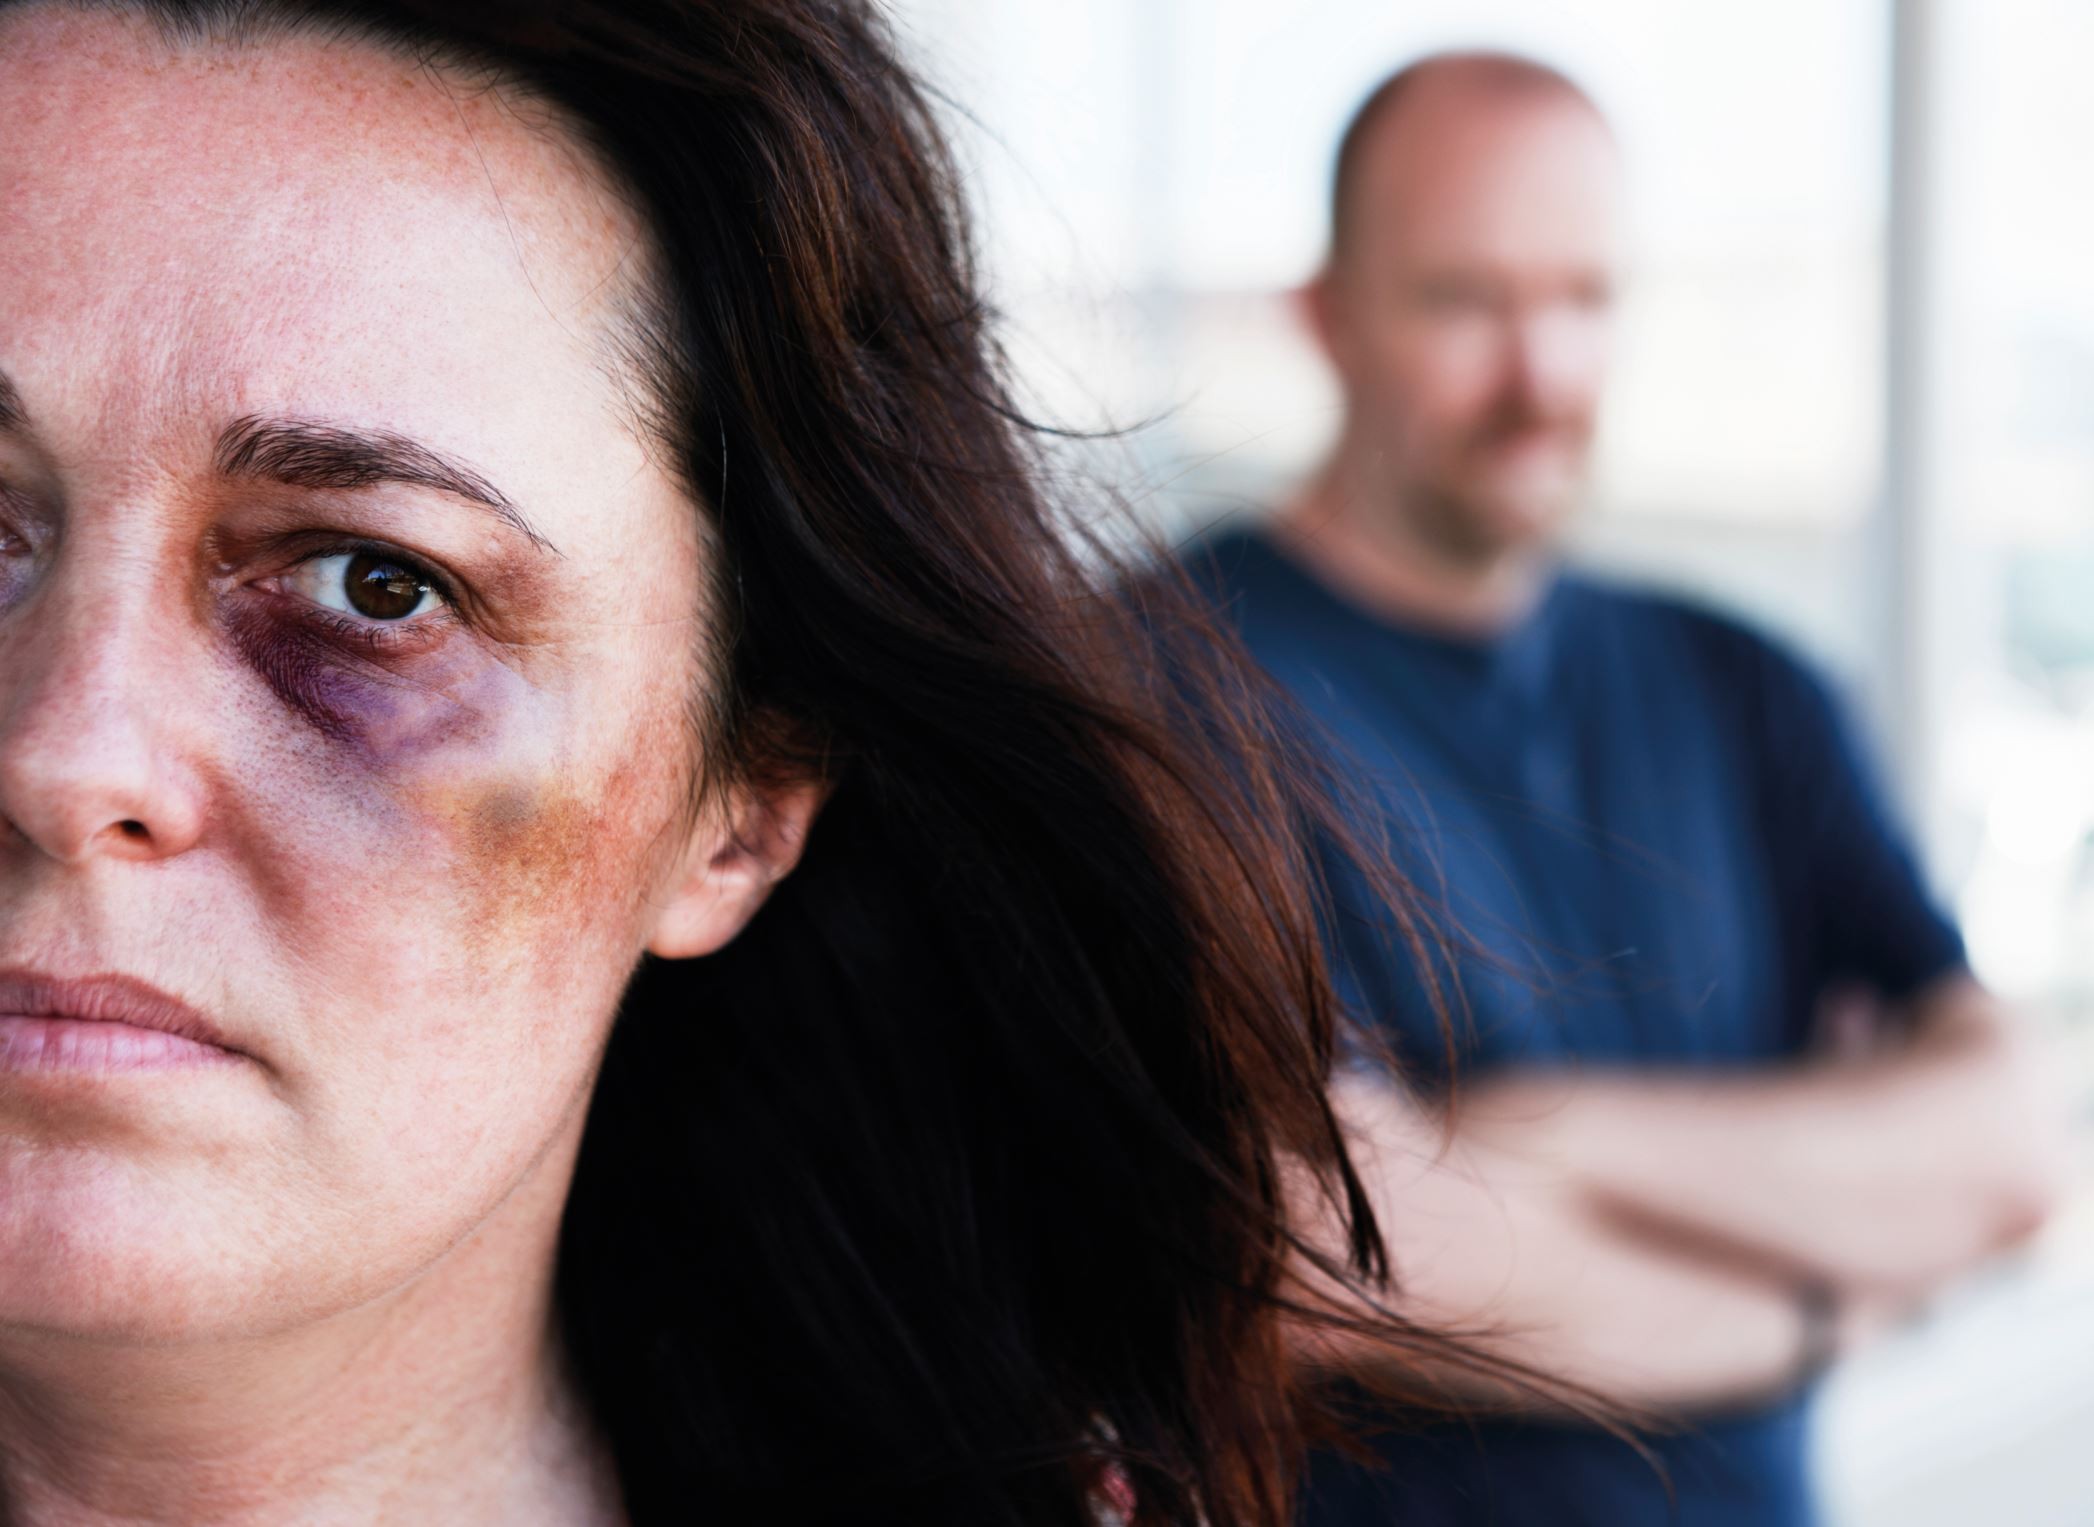 What Can I Do If My Spouse Has Gotten Physically Abusive?